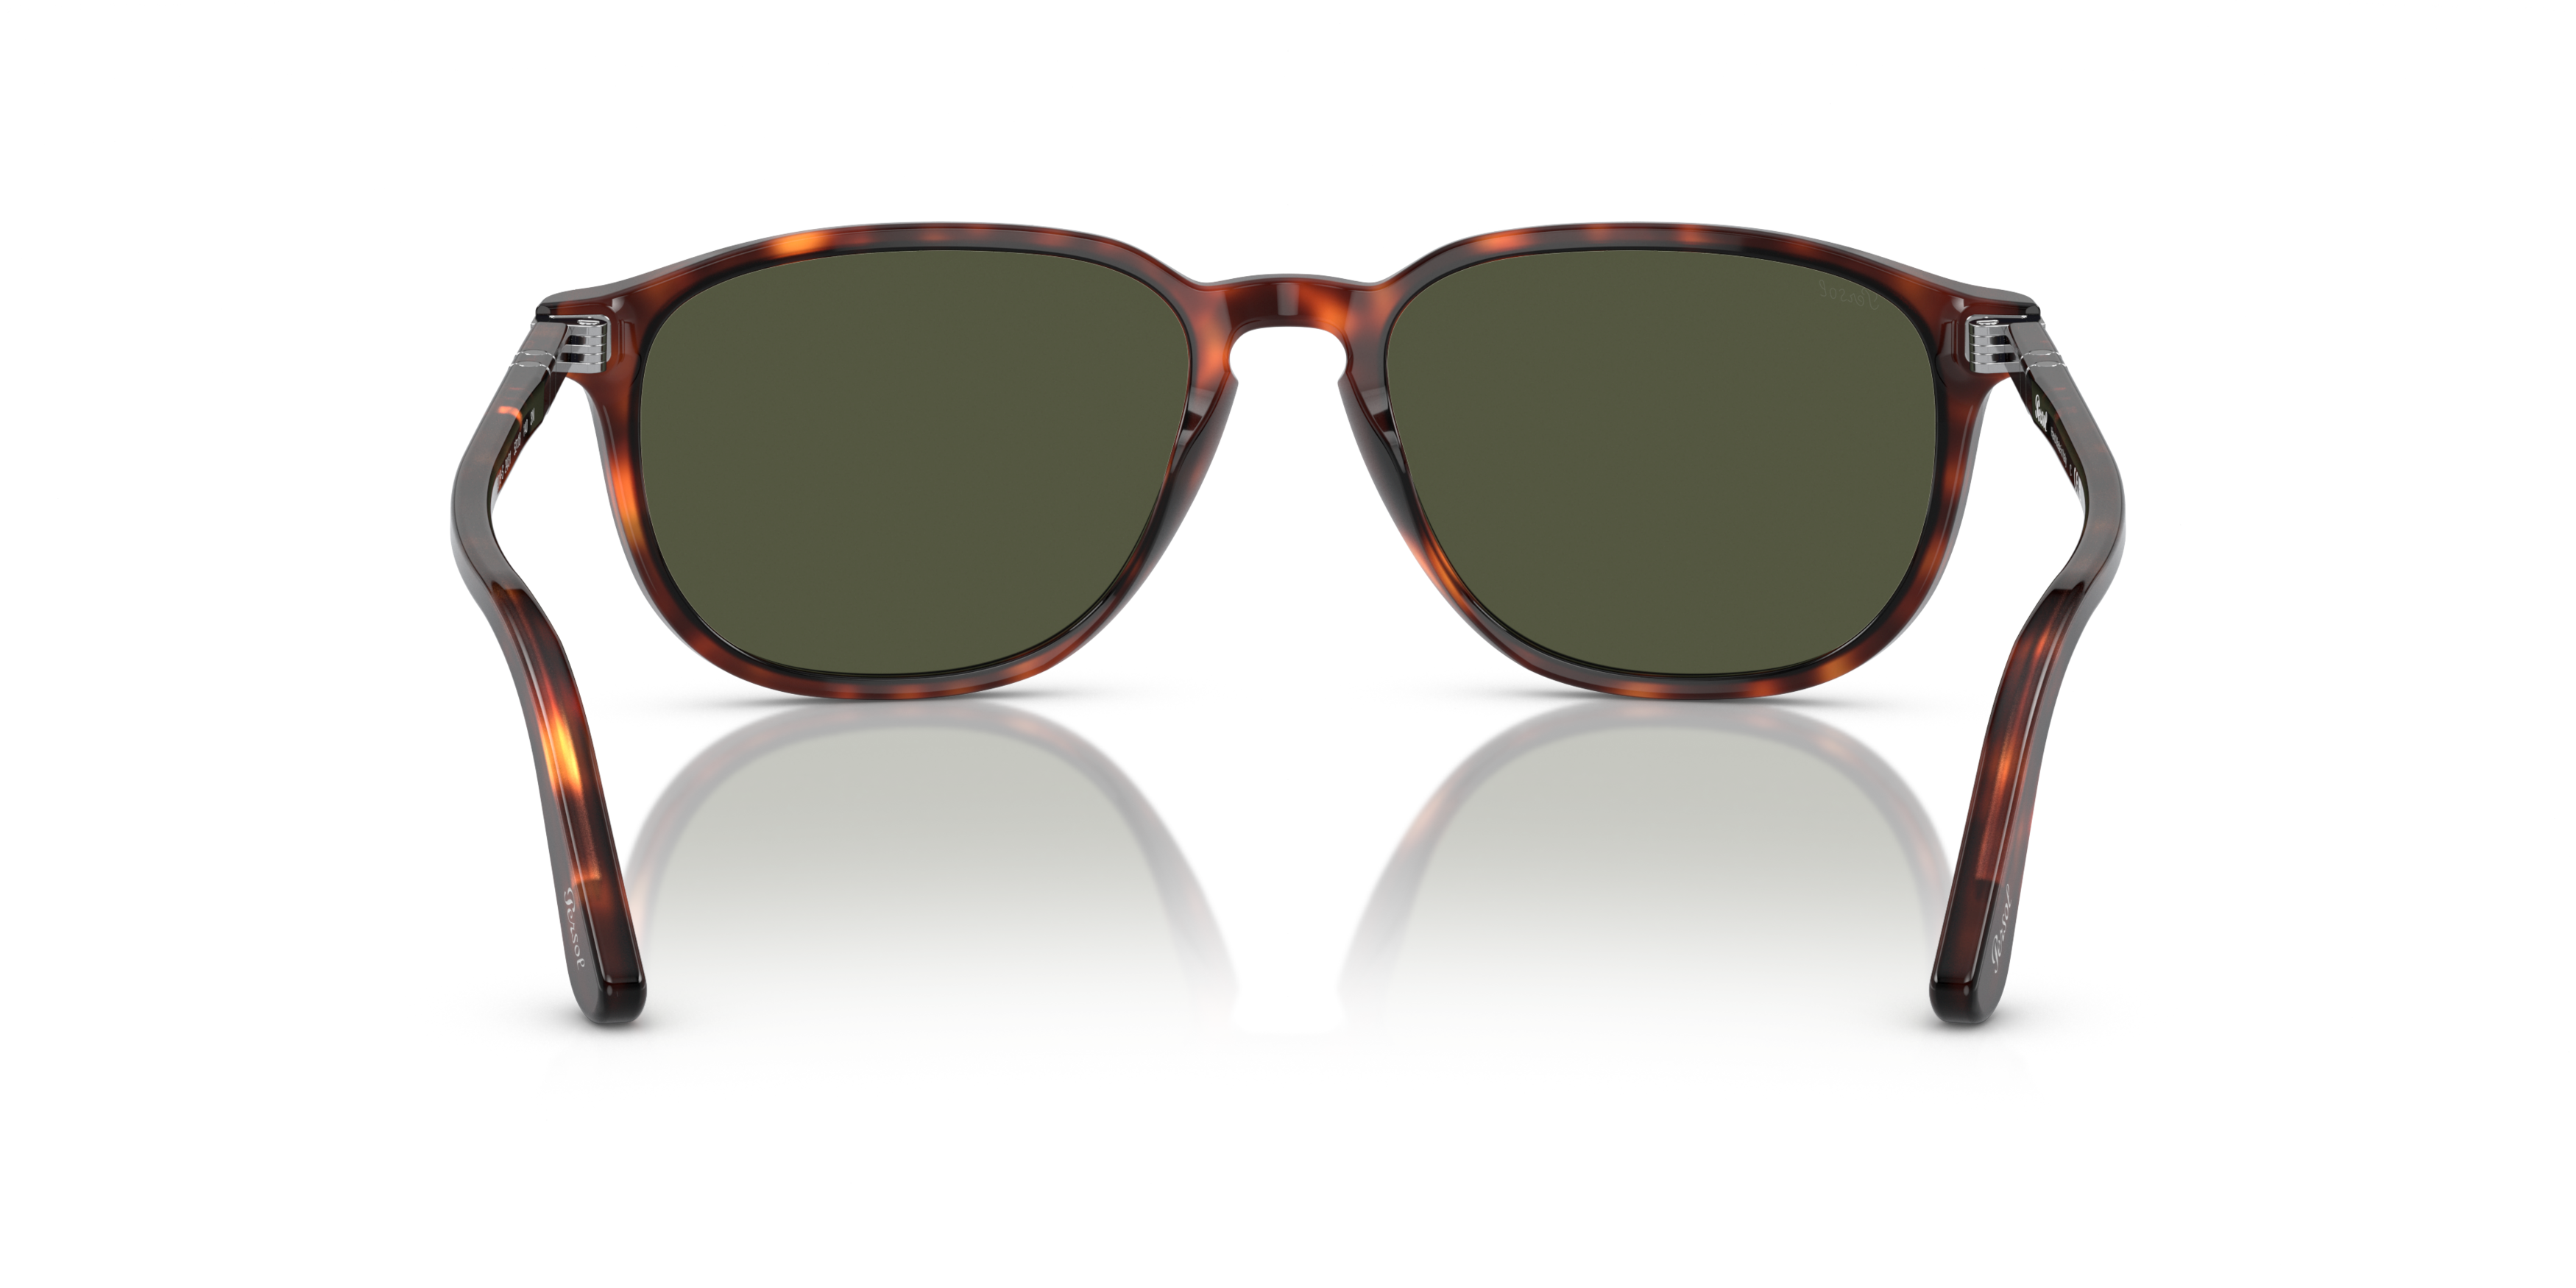 [products.image.detail02] Persol 0PO3019S 24/31